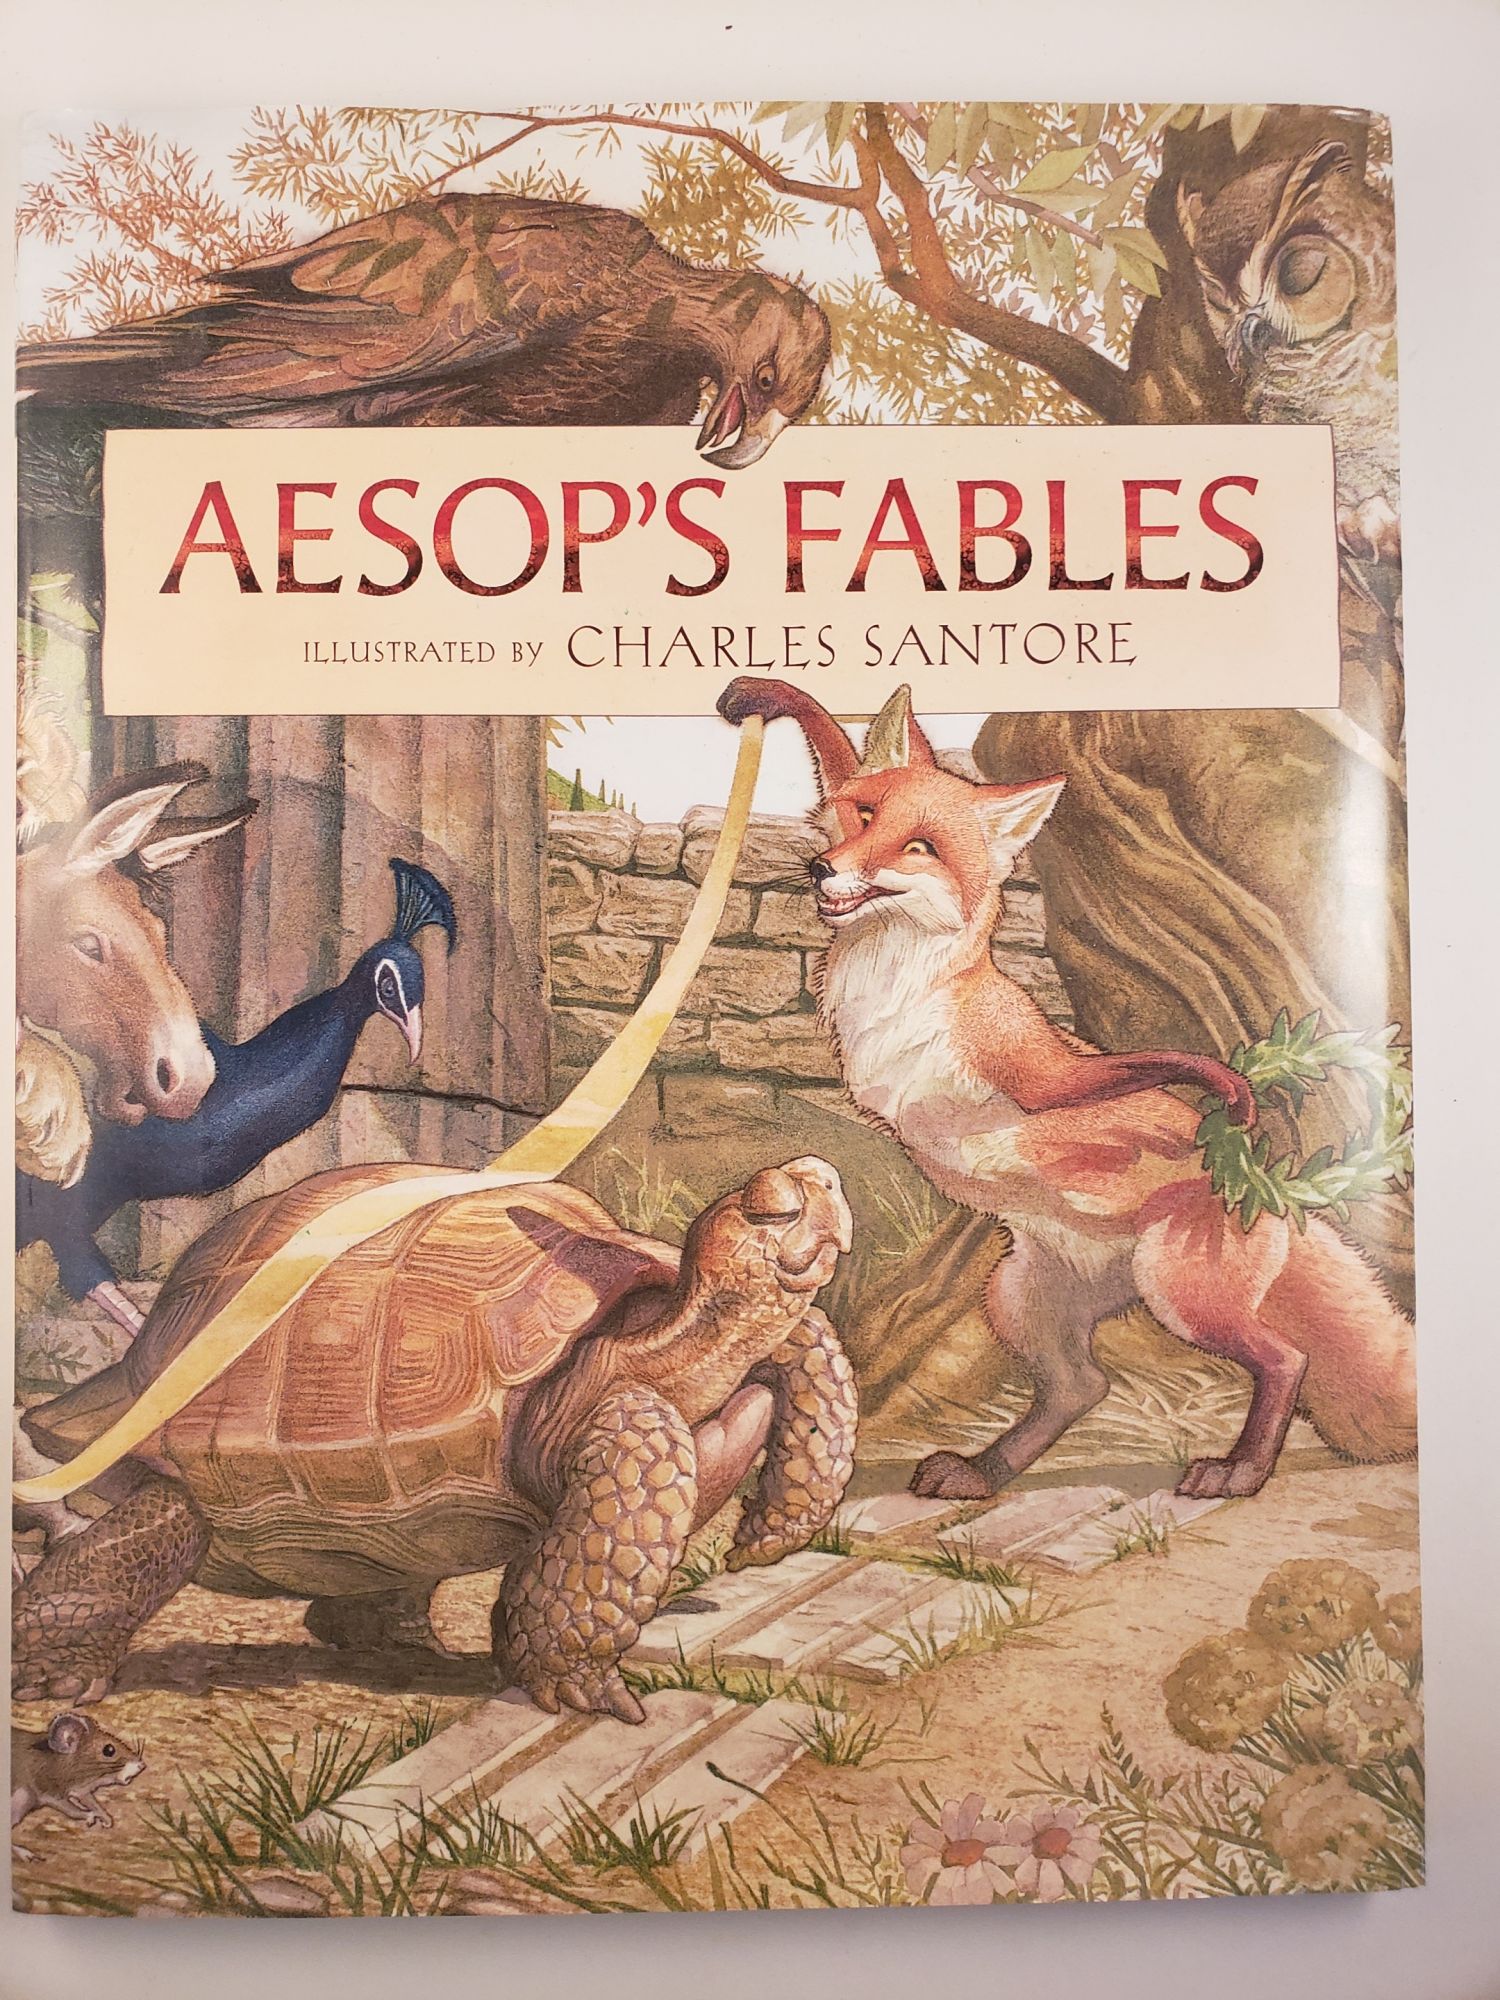 Aesop's Fables - Aesop and illustrated by Charles Santore